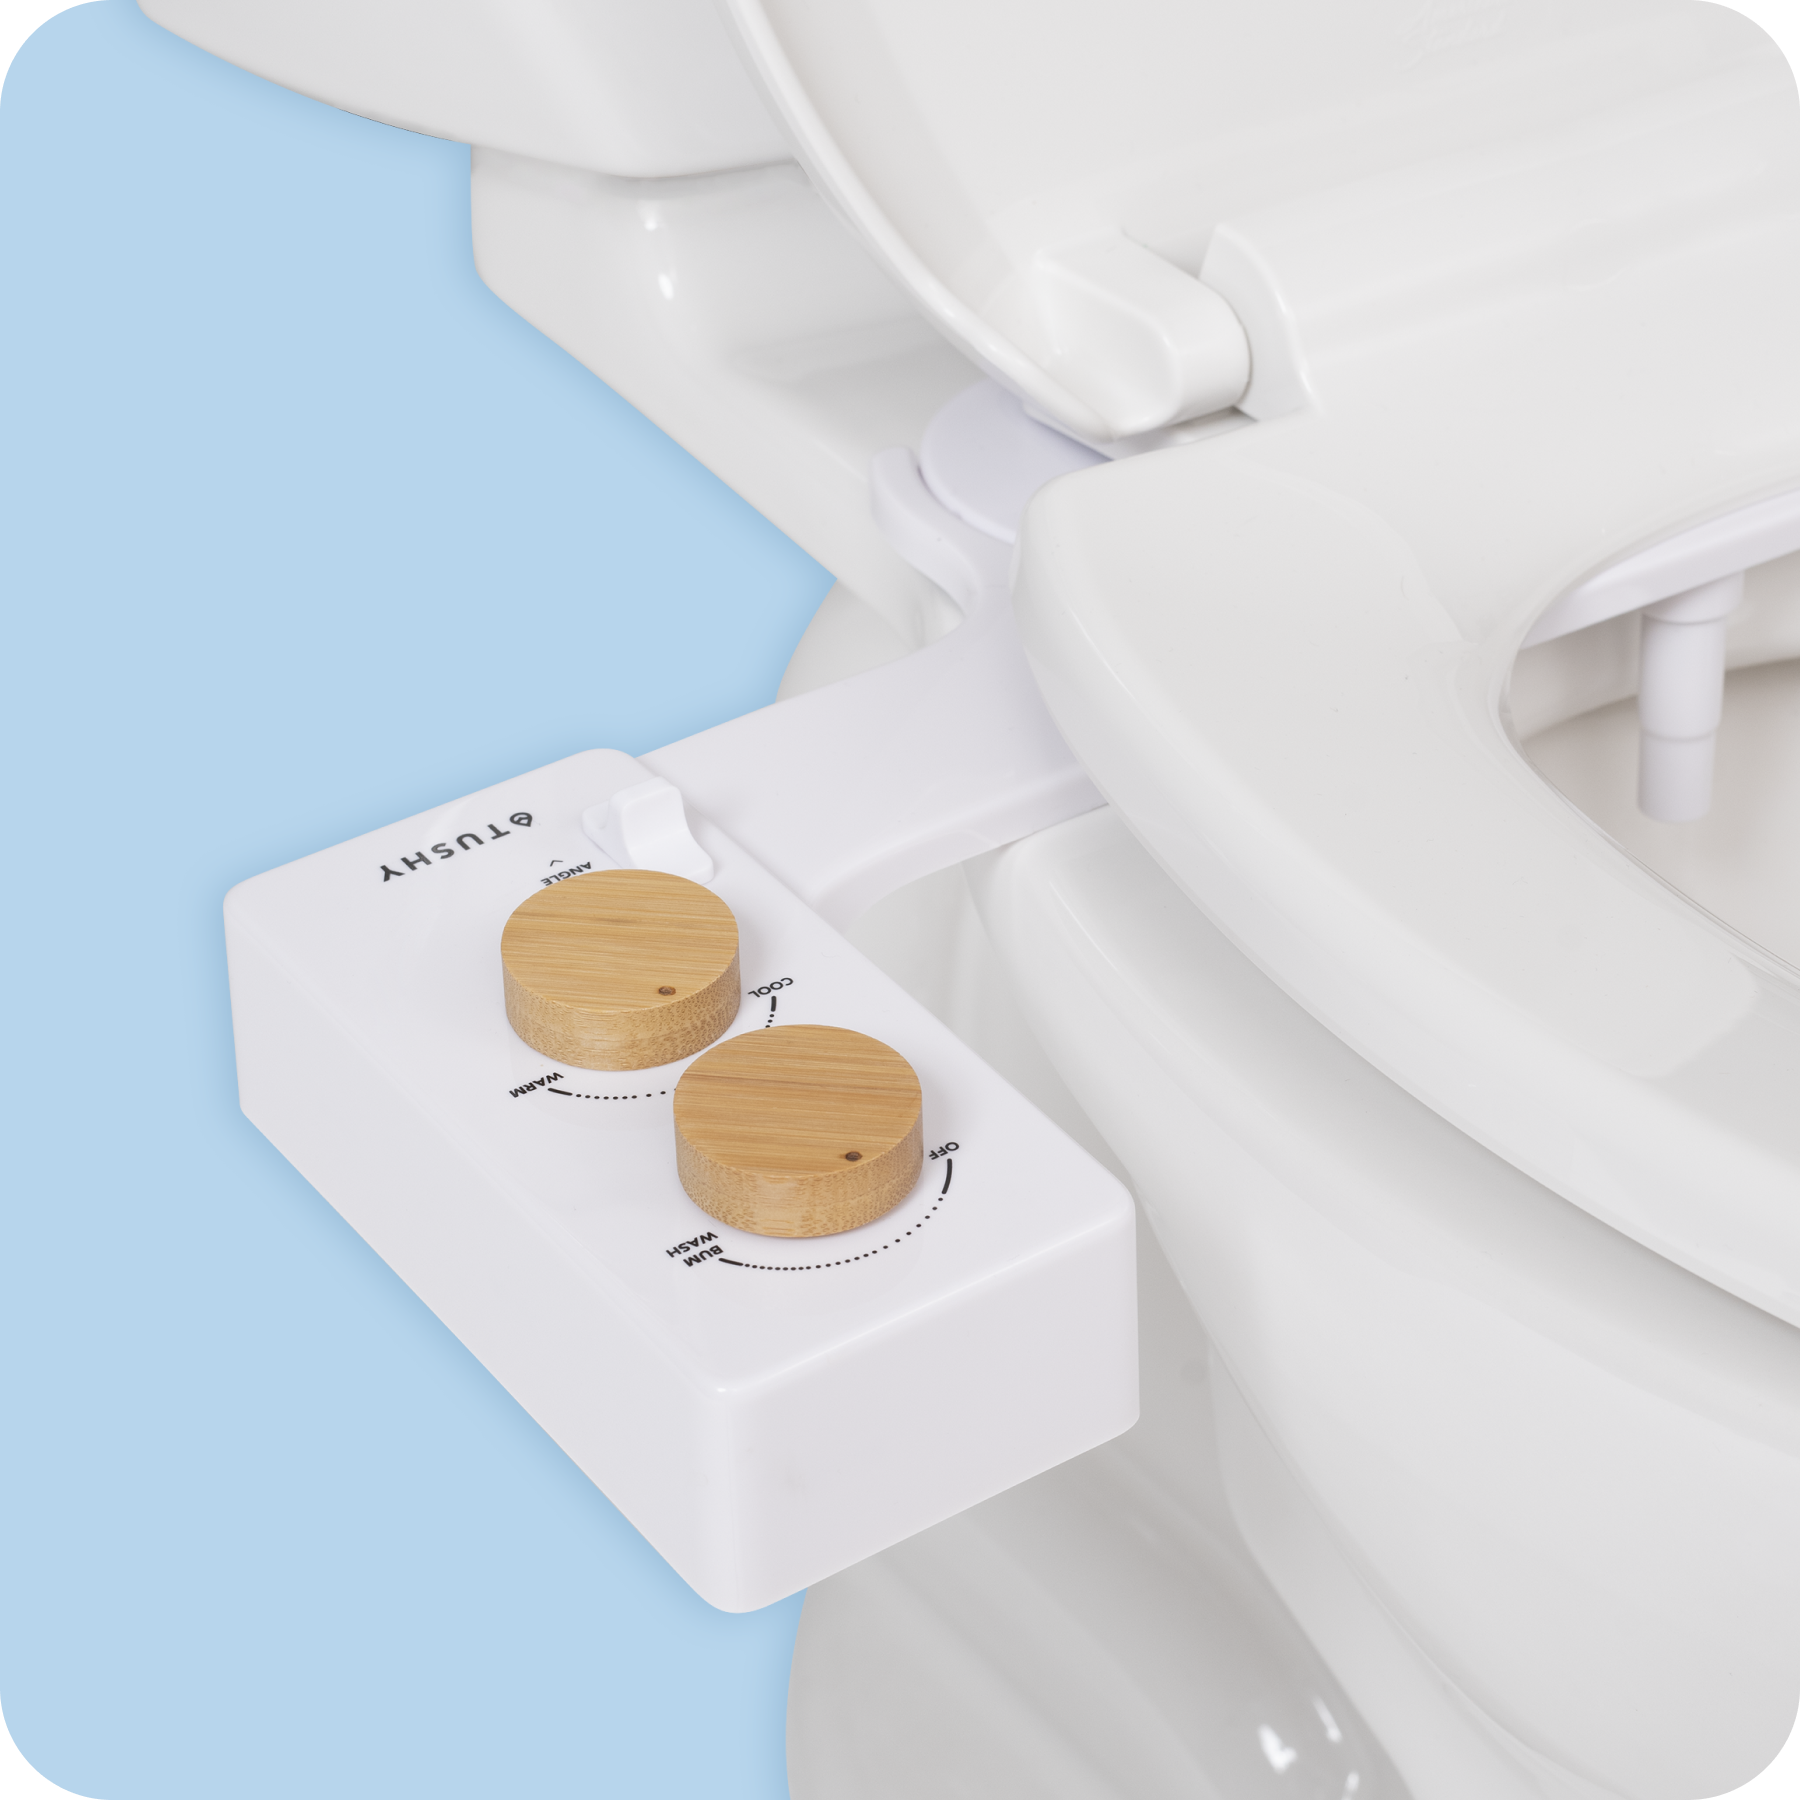 Tushy Spa 3.0 White / Bamboo-classic - a warm water bidet attachment by TUSHY White with Bamboo Knobs